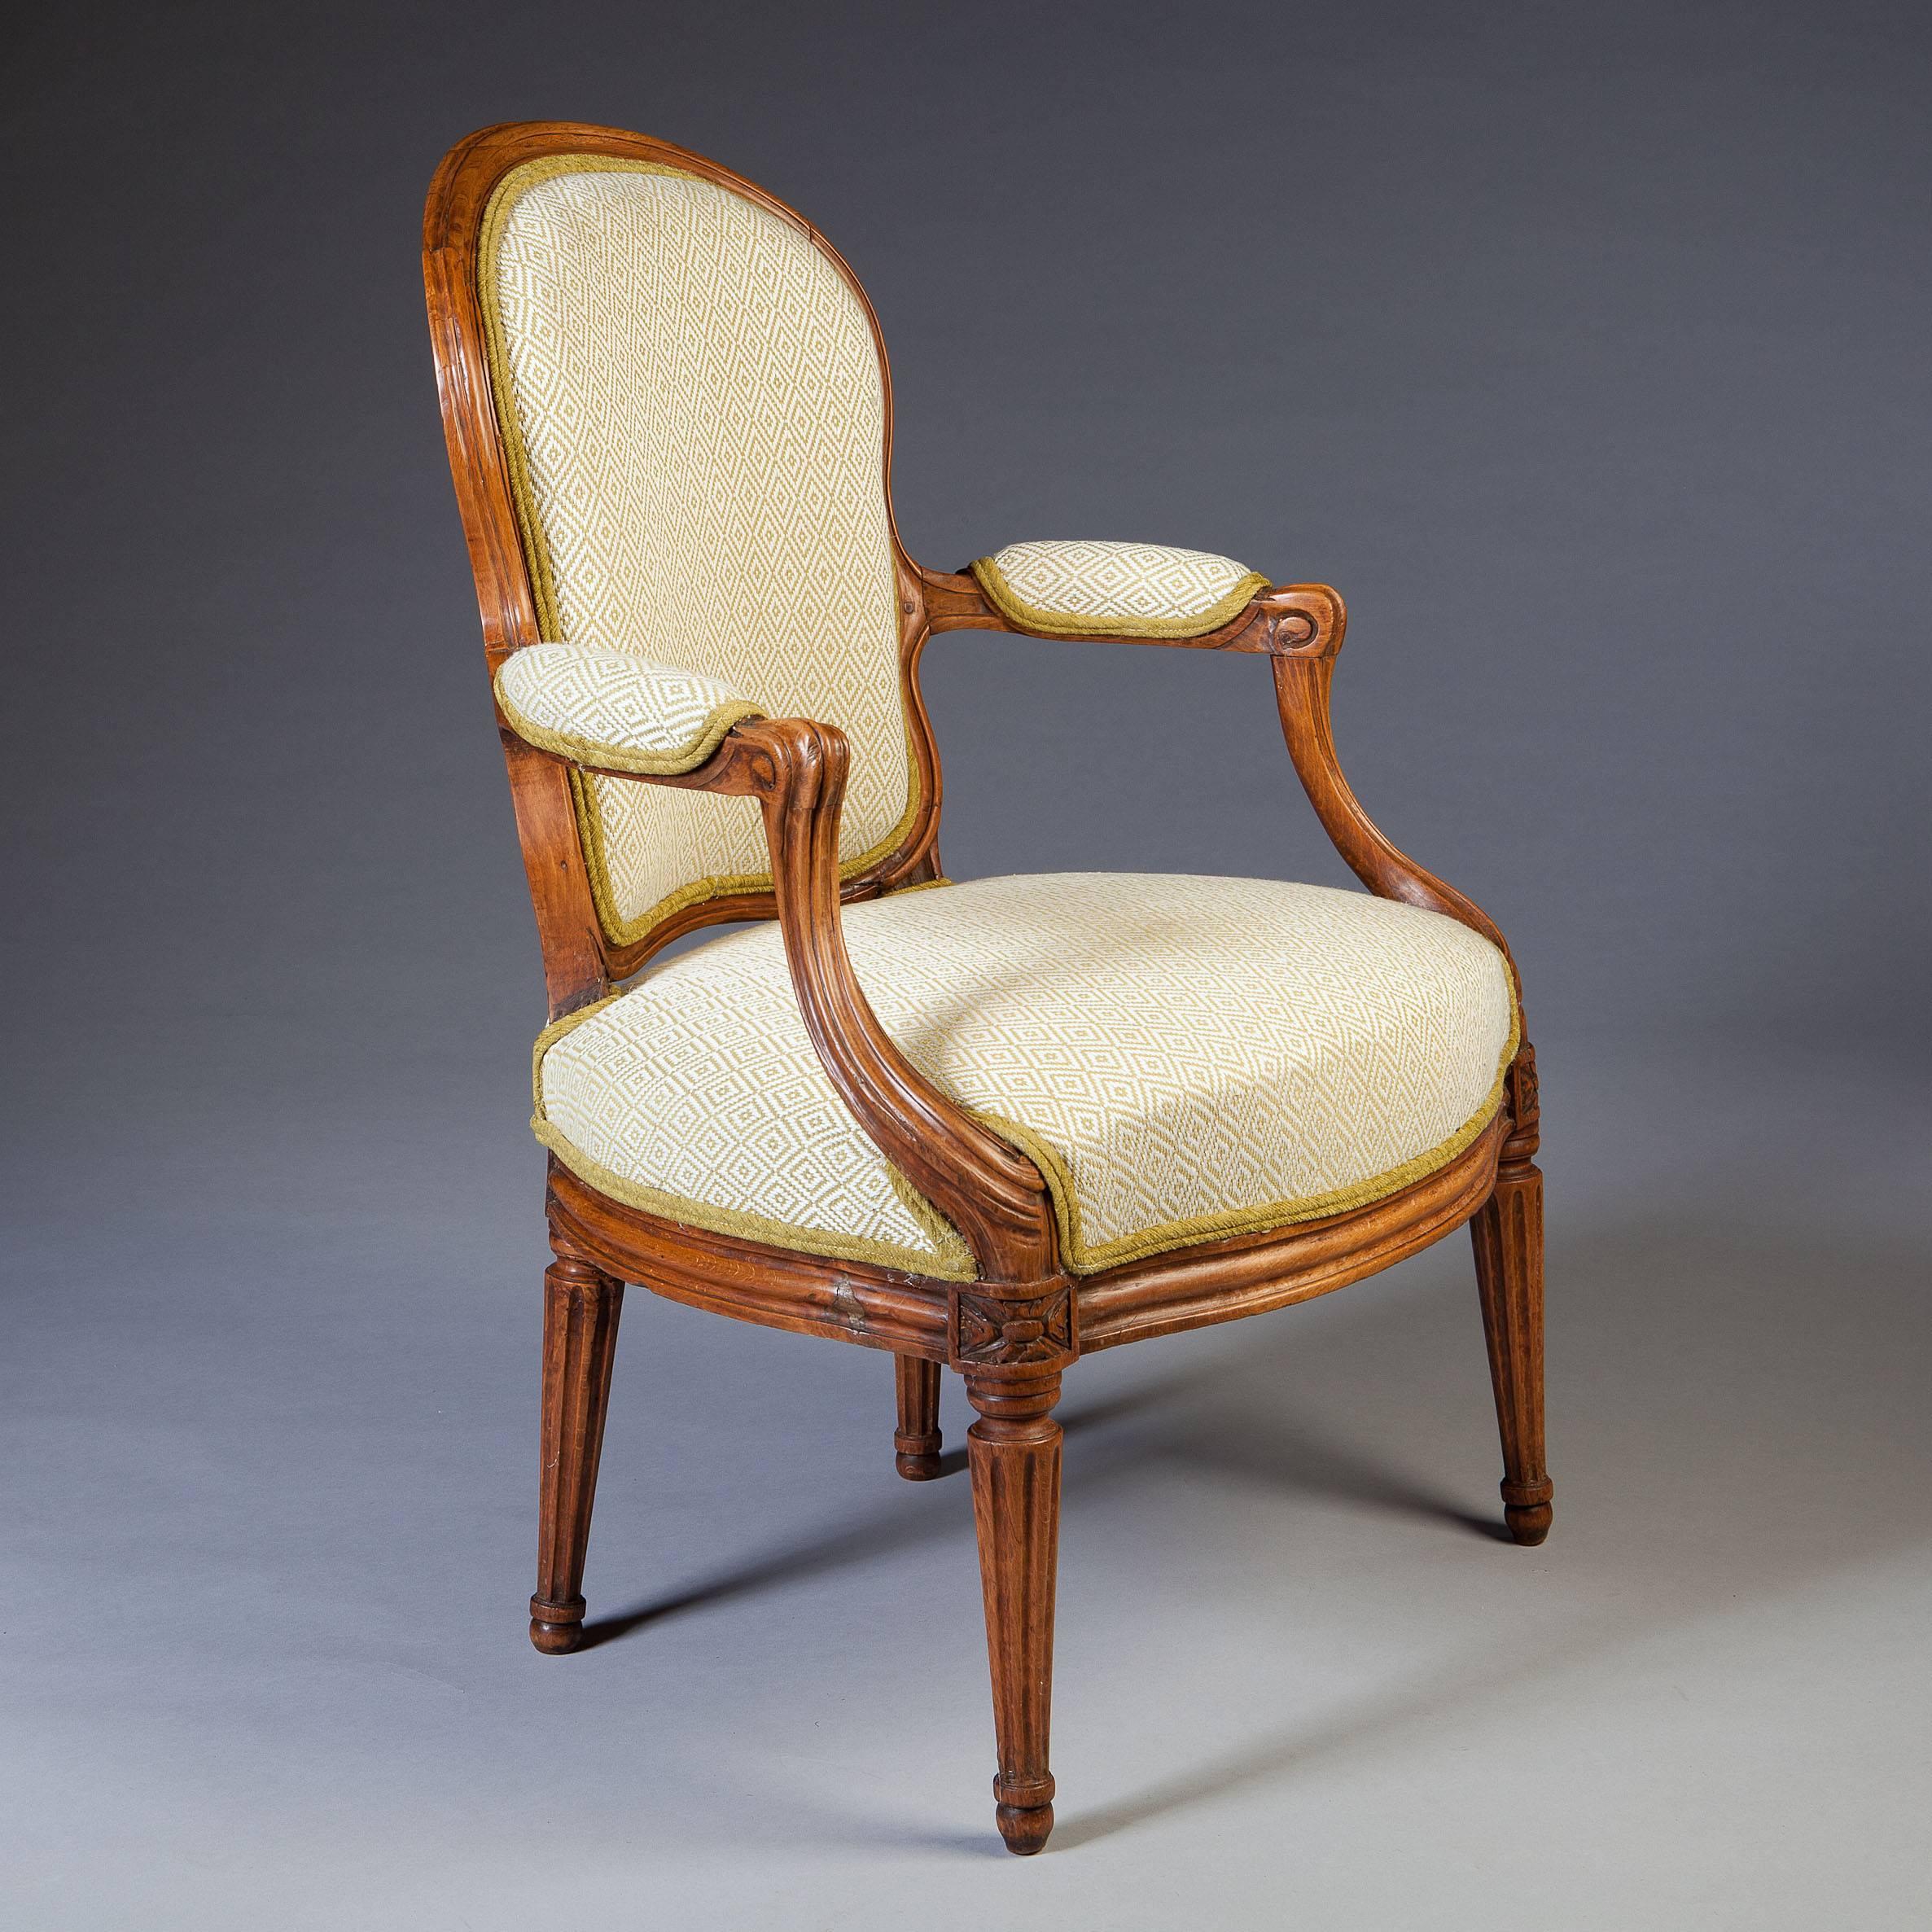 France, circa 1770.
​
A charming pair of late Louis XV period fauteuils, the kidney shaped backs of simple outline supported on neoclassical fluted tapering legs. Each armchair stamped on the rails N.S.Courtois (Nicolas Simon Courtois master 1766